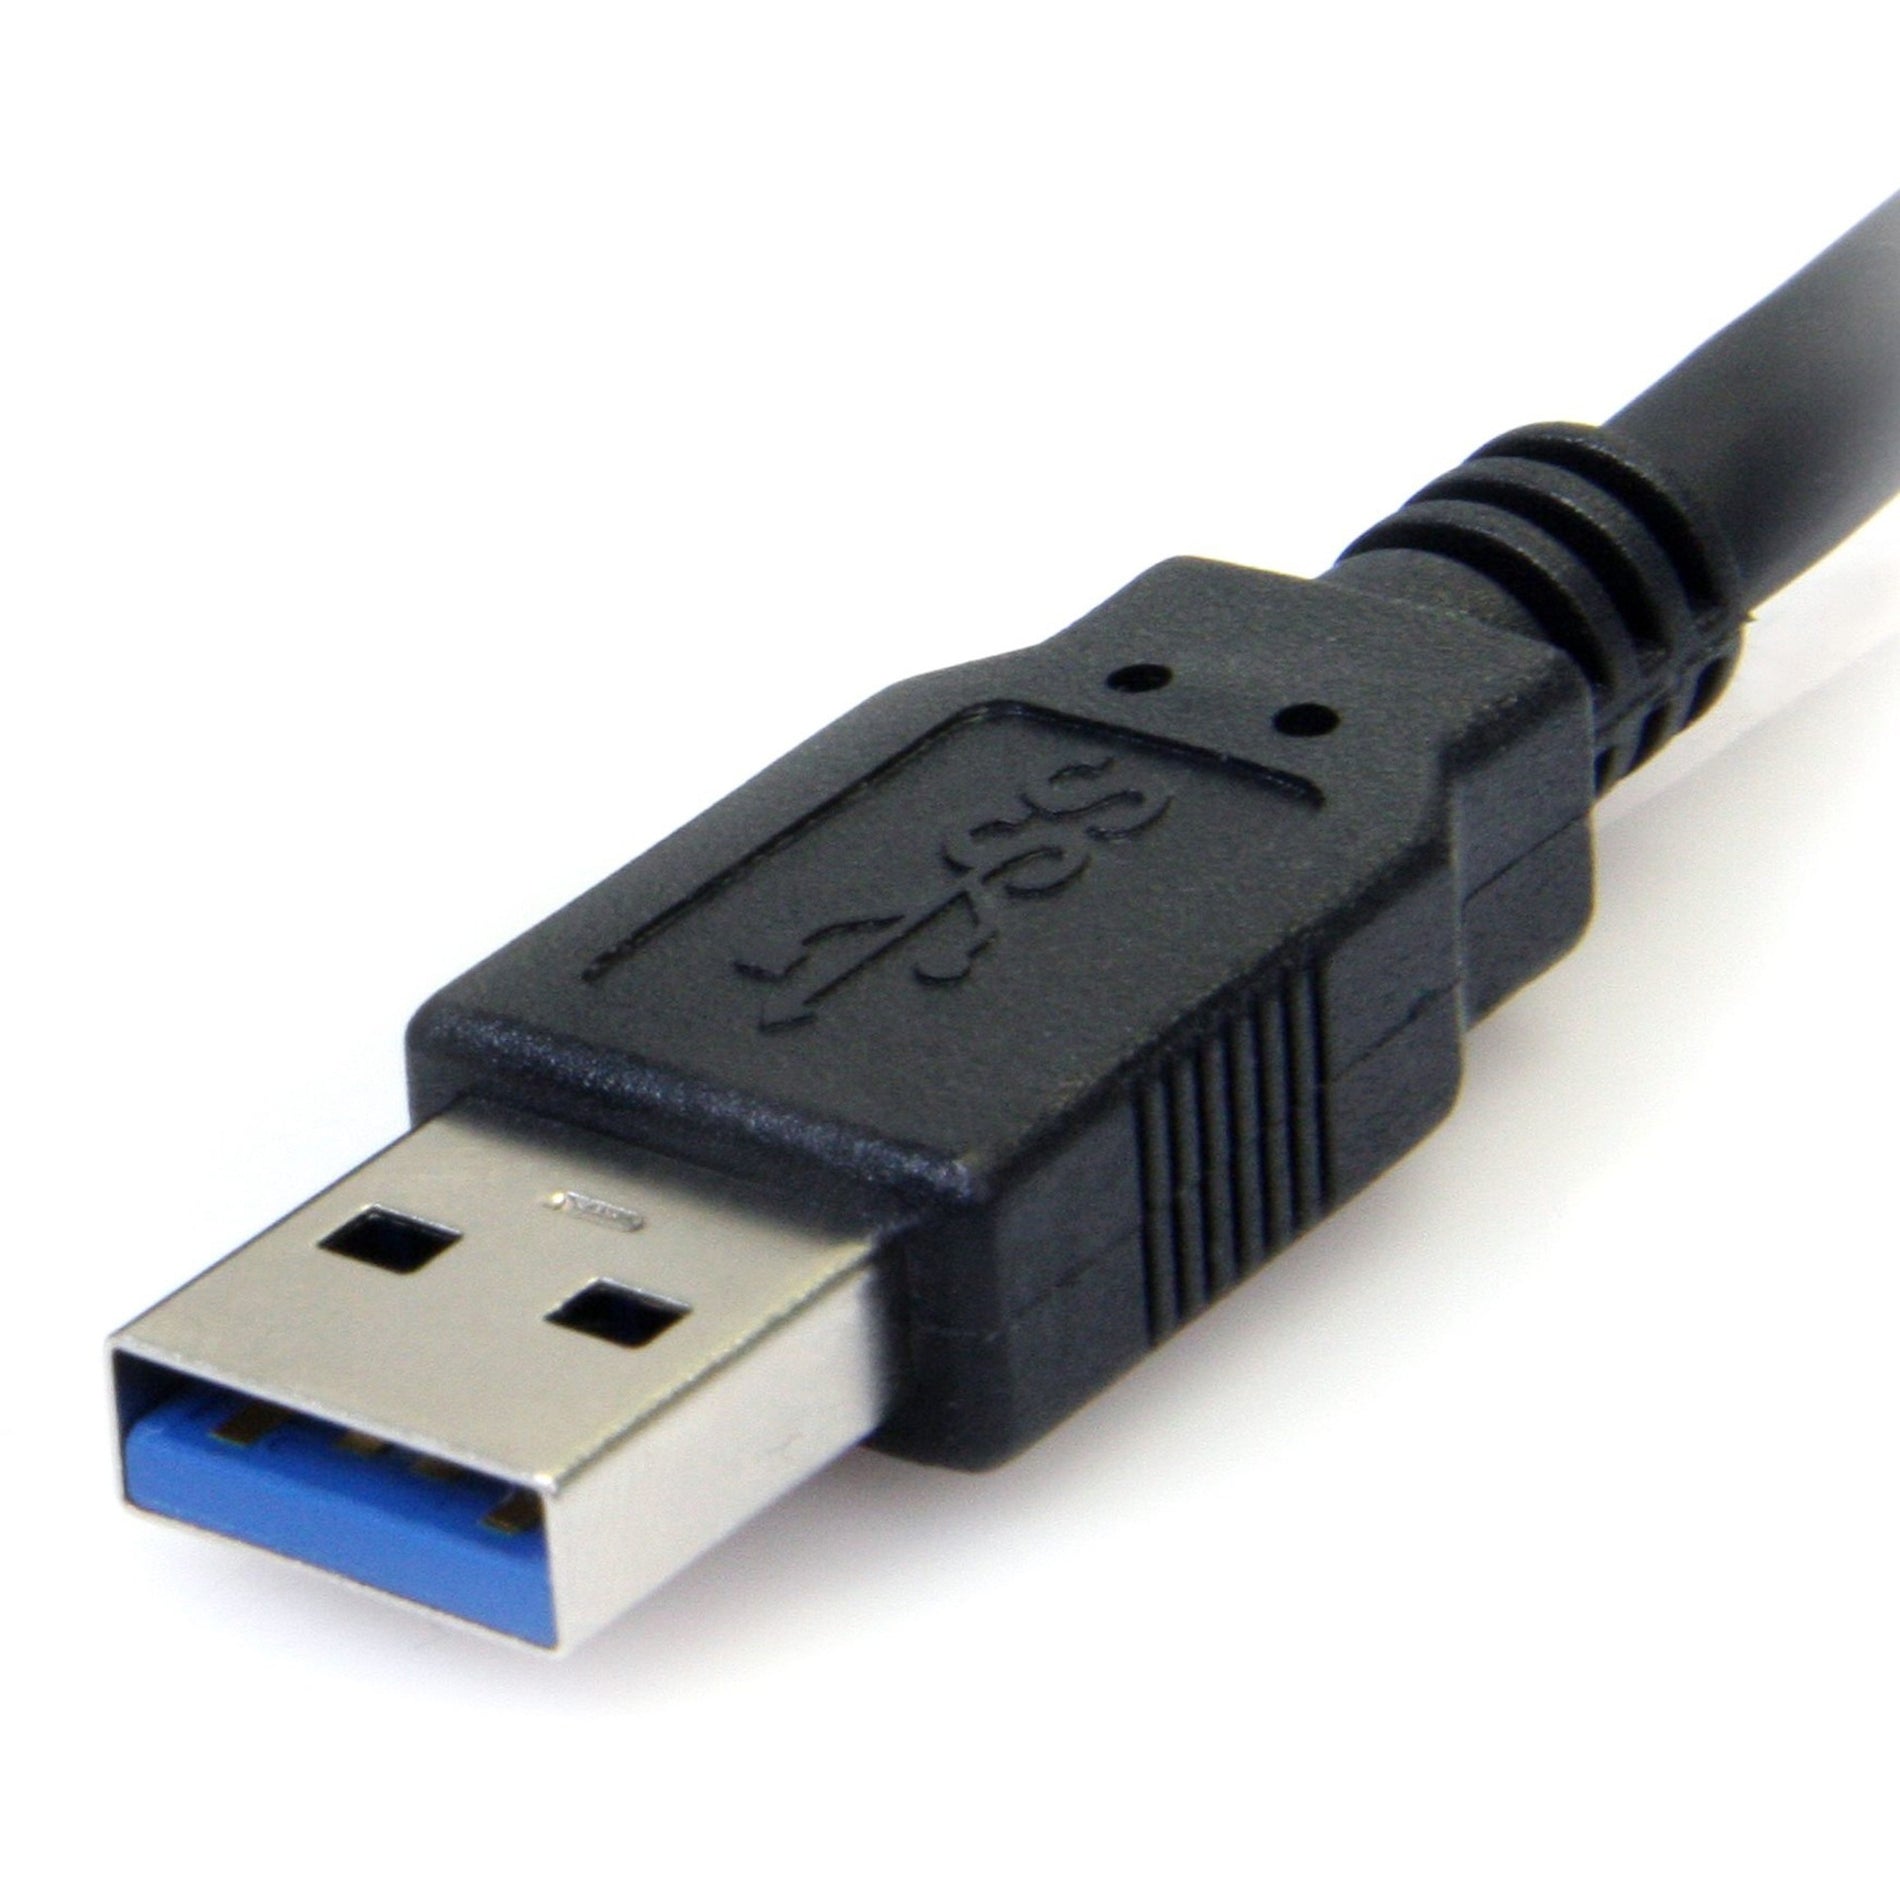 StarTech.com USB3SAB10BK 10 ft Black SuperSpeed USB 3.0 Cable A to B - M/M, High-Speed Data Transfer, Lifetime Warranty